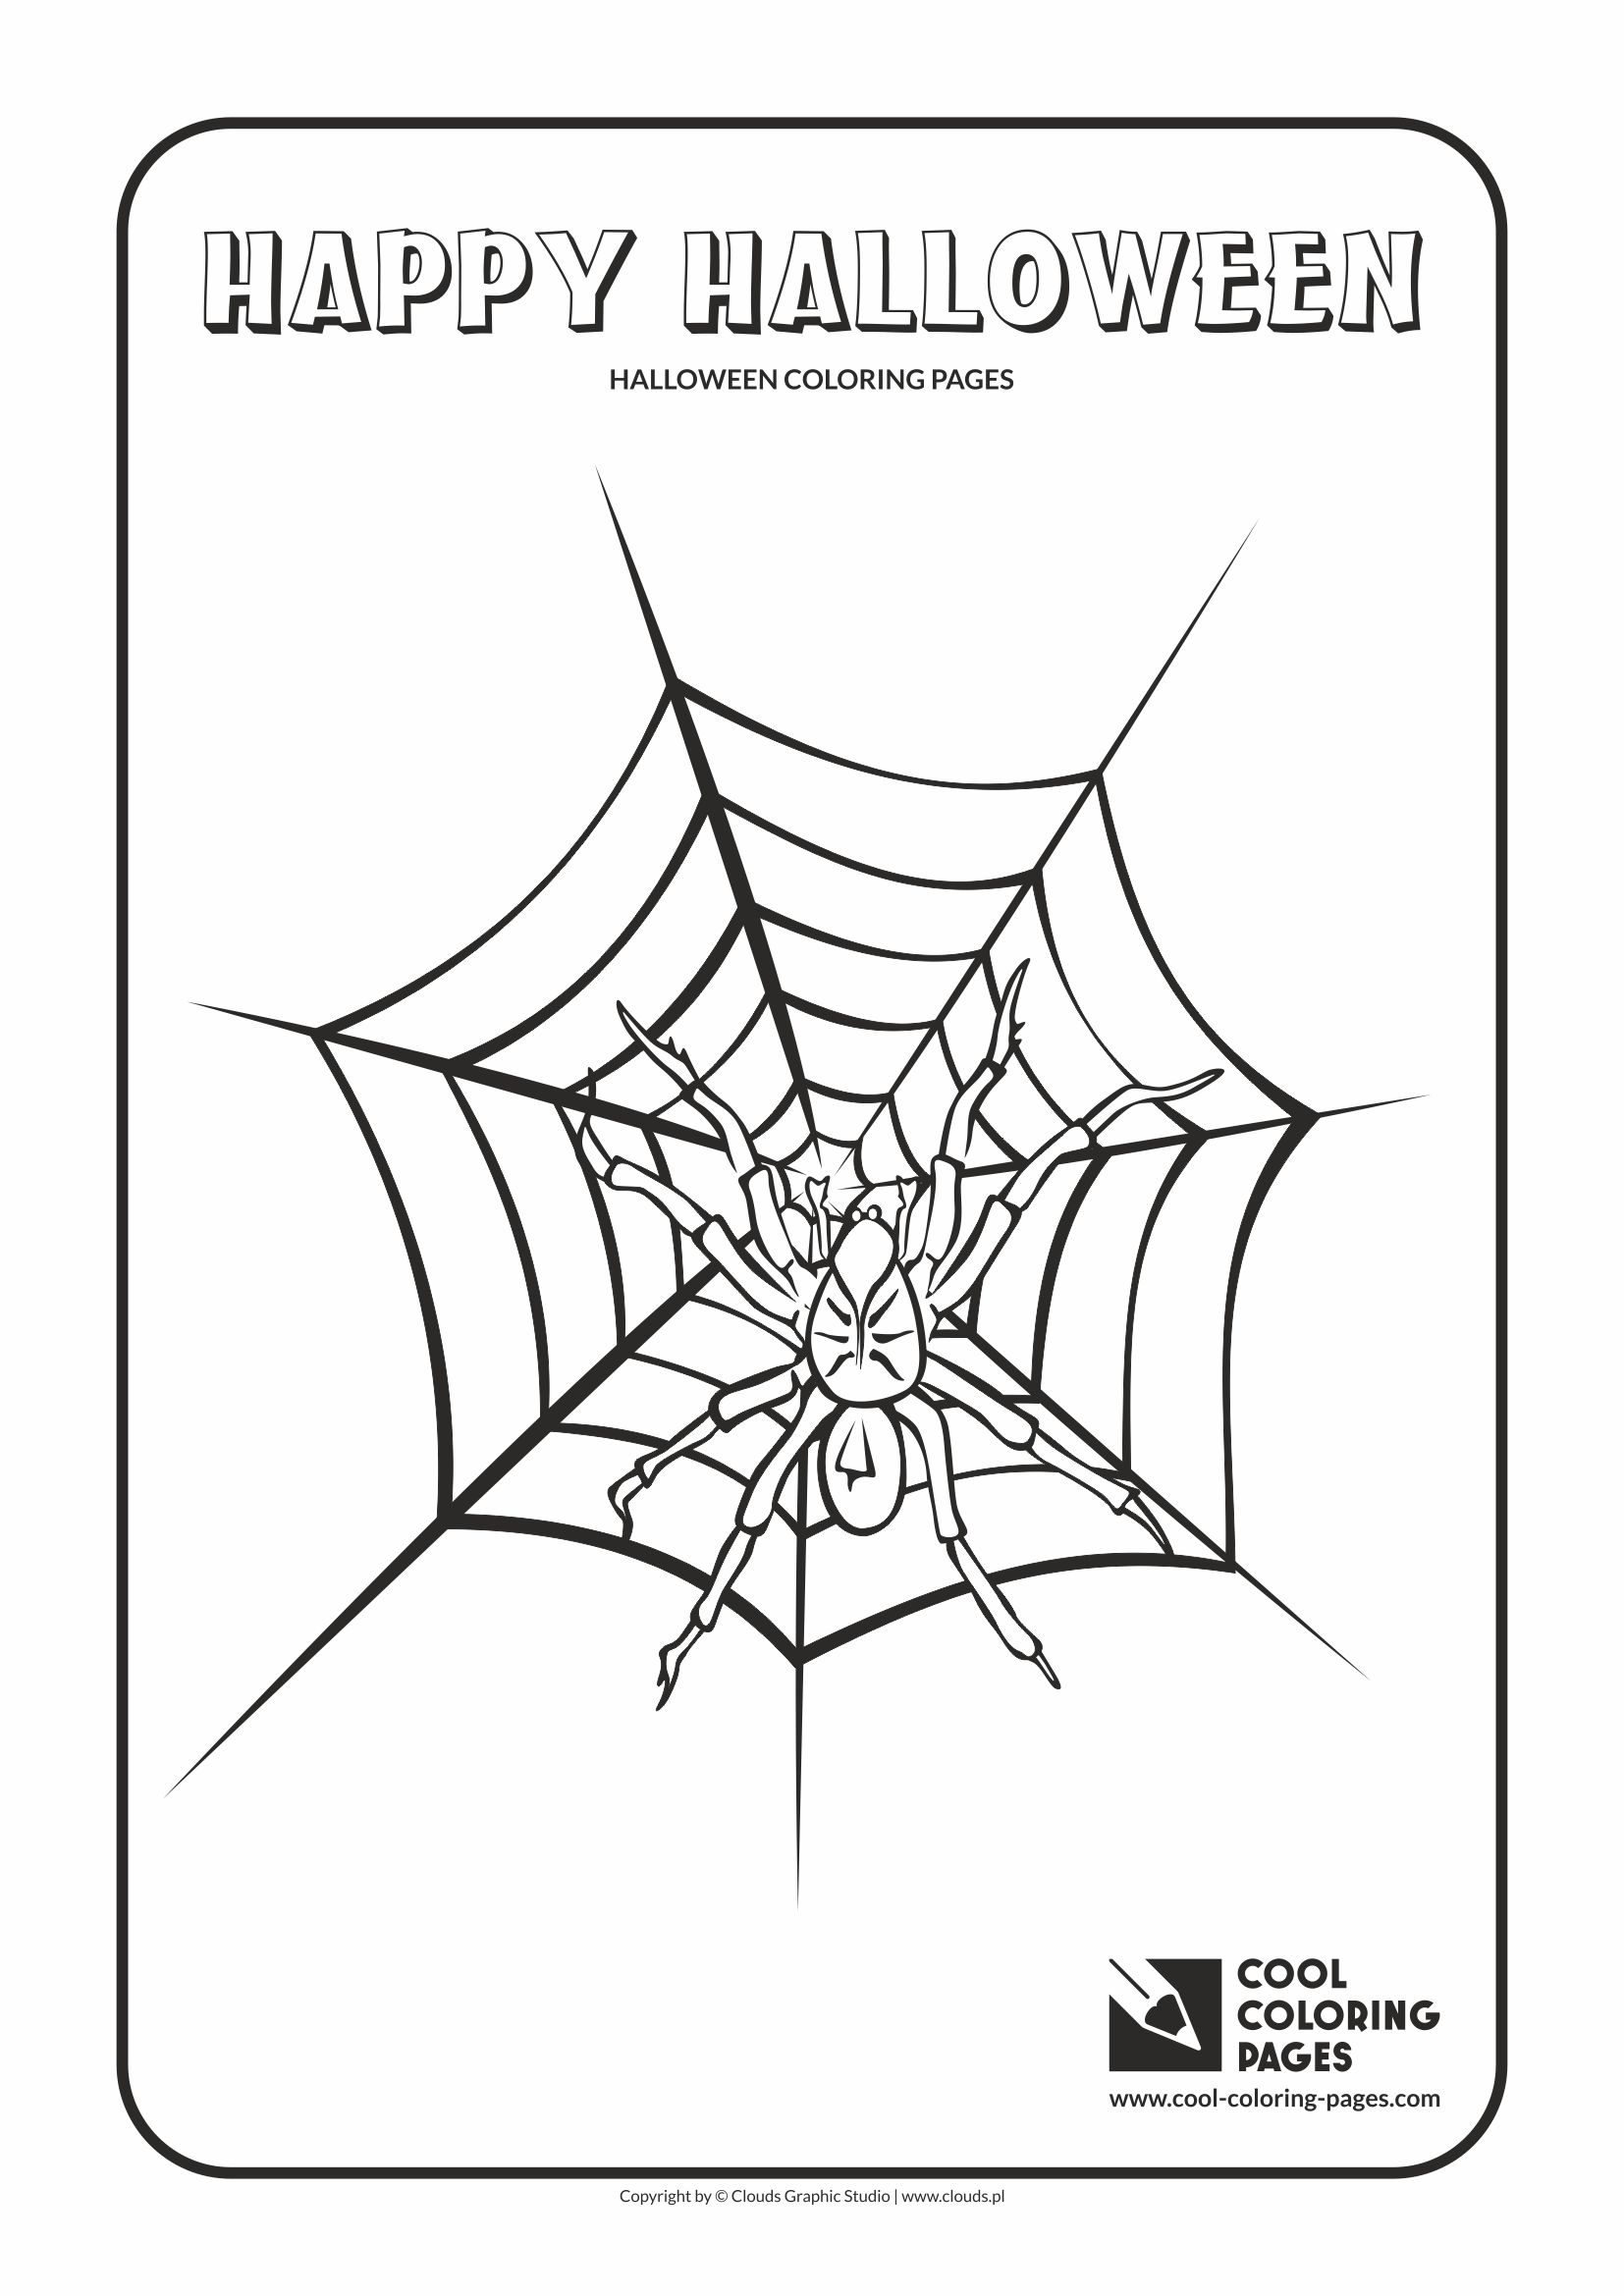 Cool Coloring Pages - Holidays / Halloween spider / Coloring page with Halloween spider